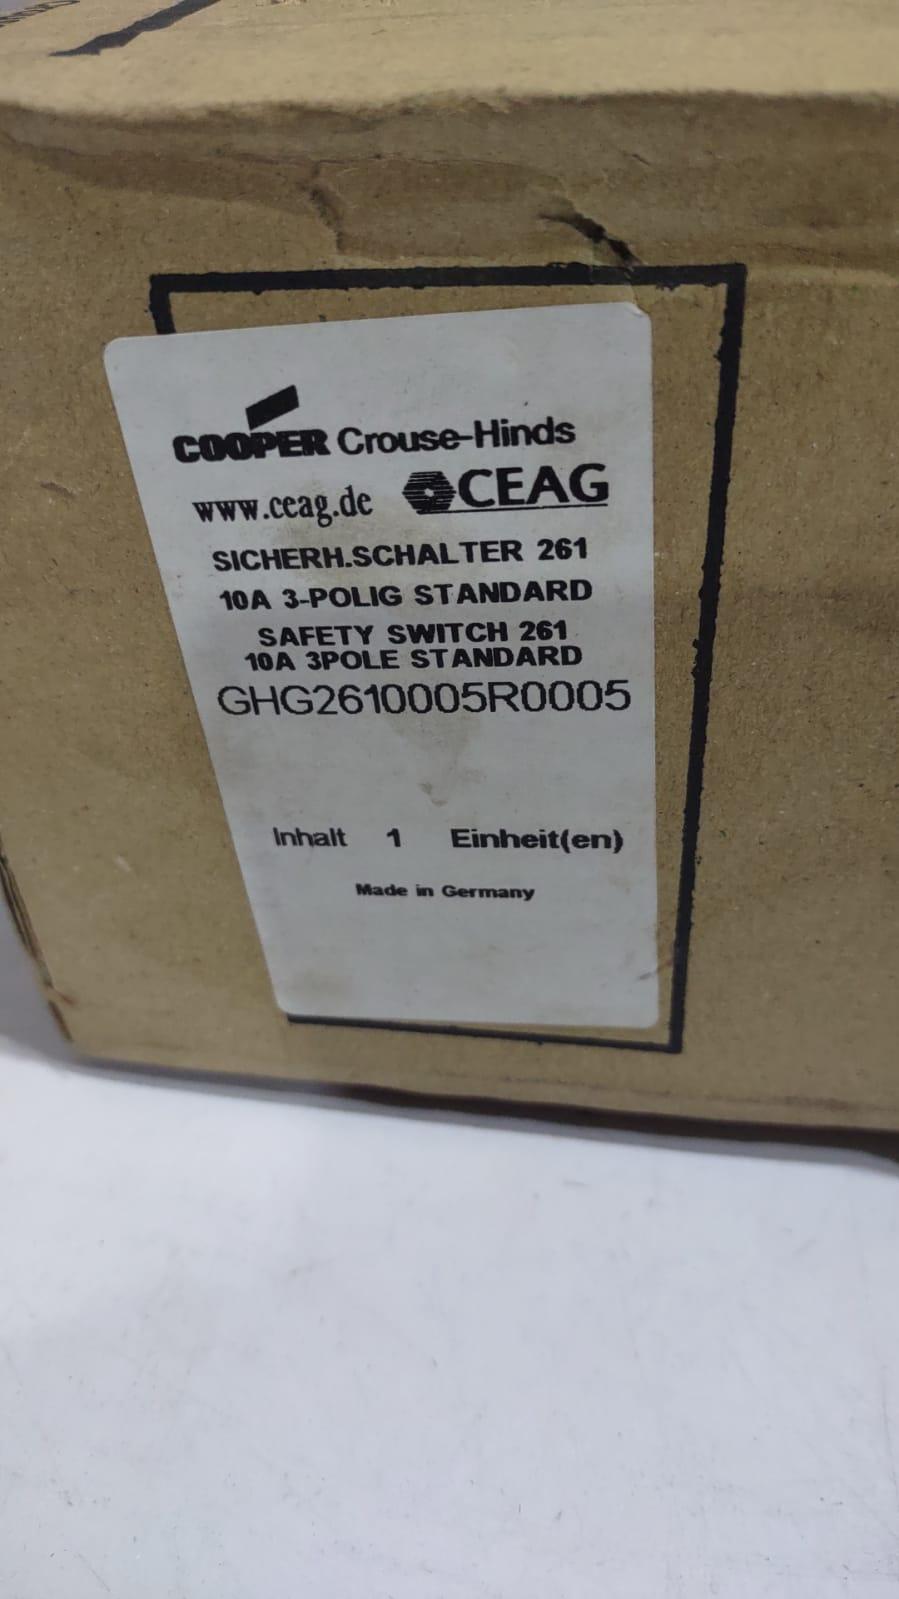 Cooper Crouse Hinds CEAG GHG2610005R0005 Safety Switch 261